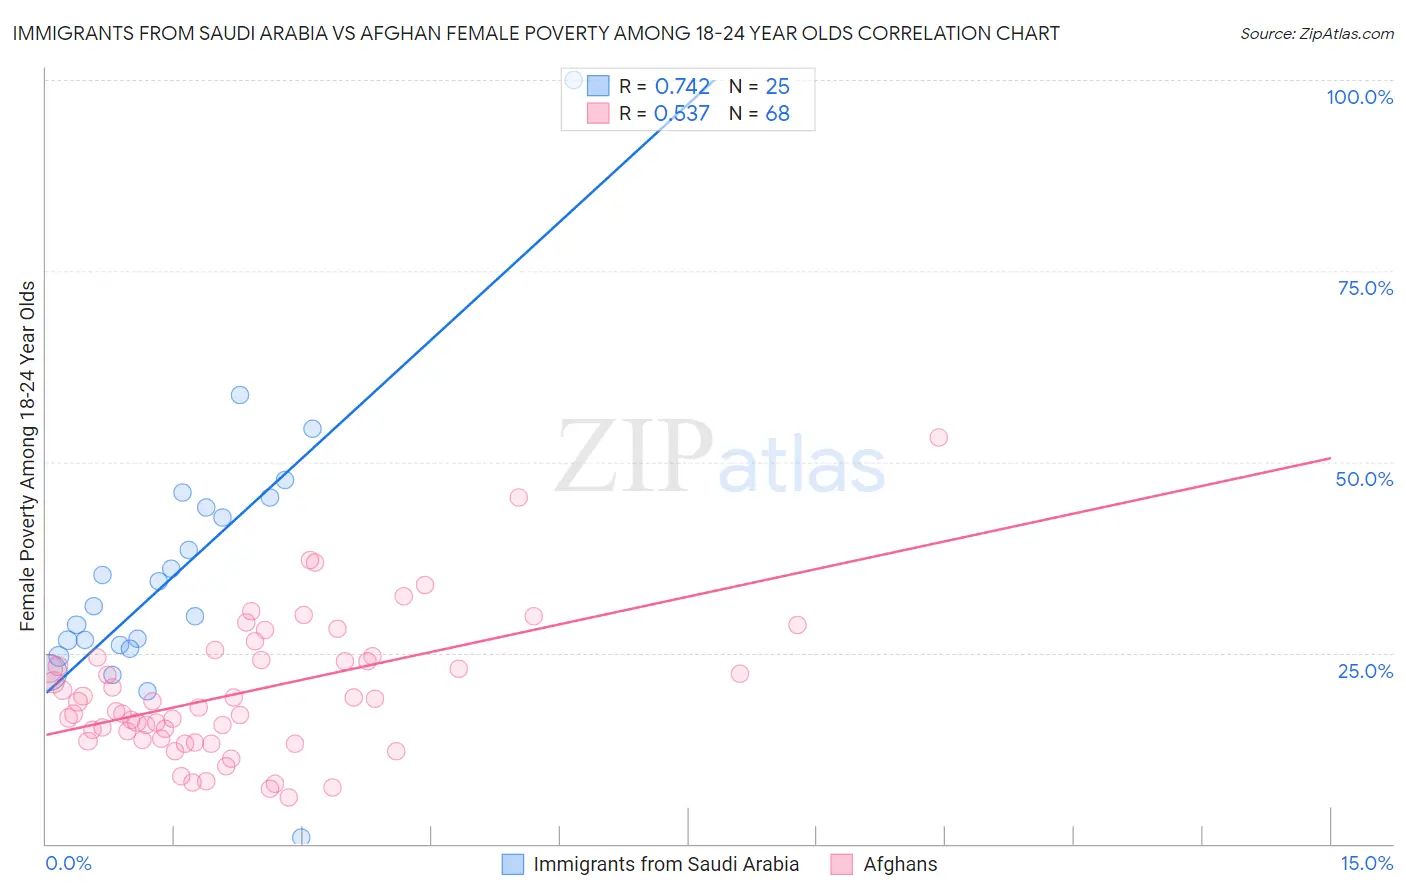 Immigrants from Saudi Arabia vs Afghan Female Poverty Among 18-24 Year Olds